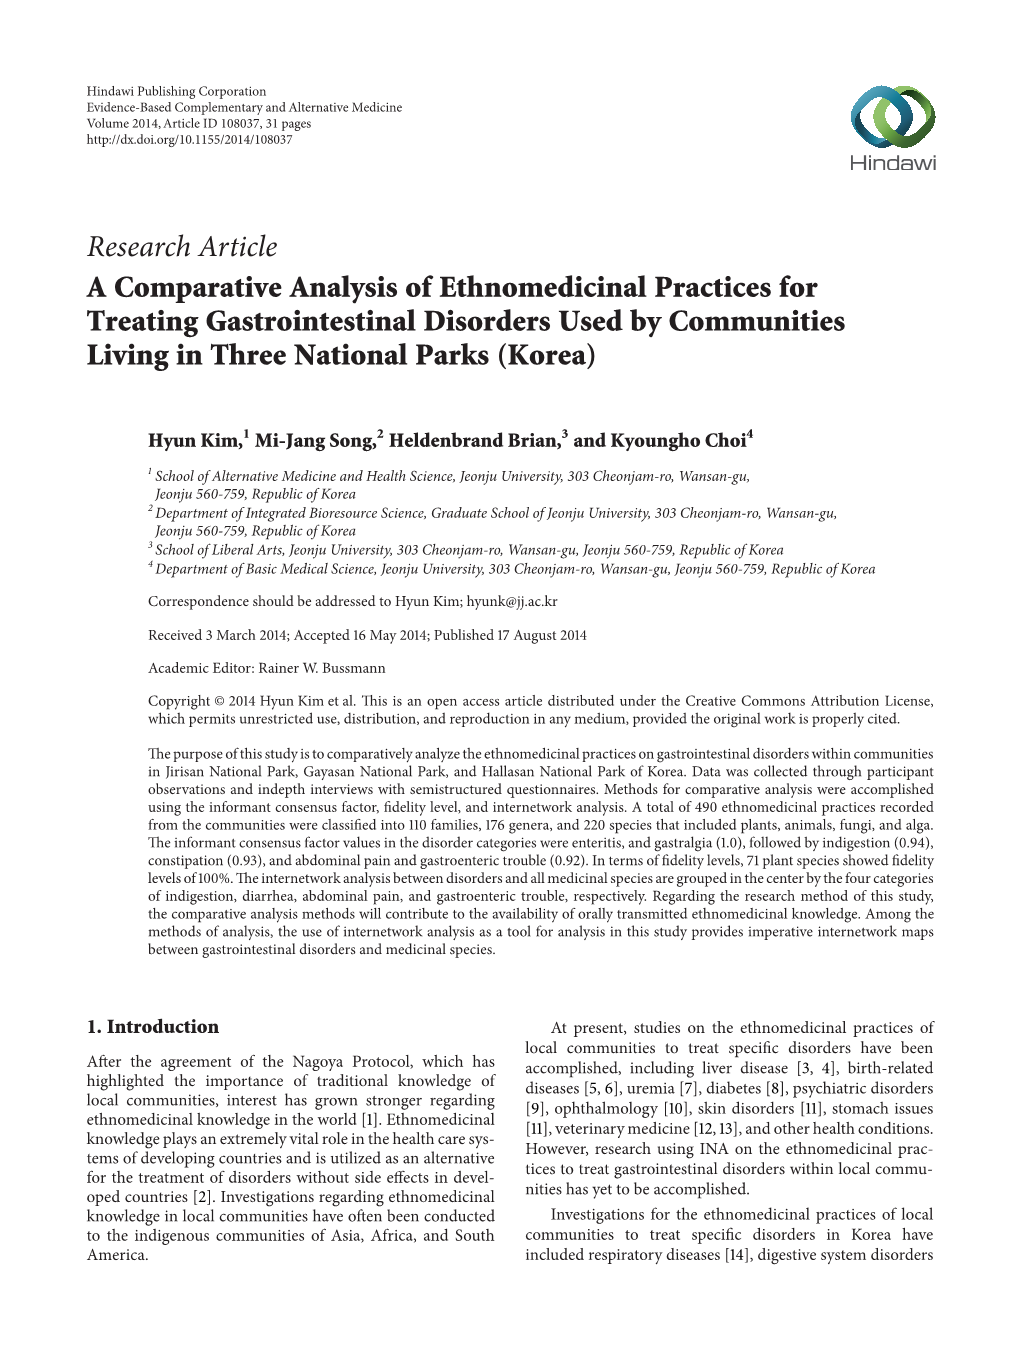 A Comparative Analysis of Ethnomedicinal Practices for Treating Gastrointestinal Disorders Used by Communities Living in Three National Parks (Korea)